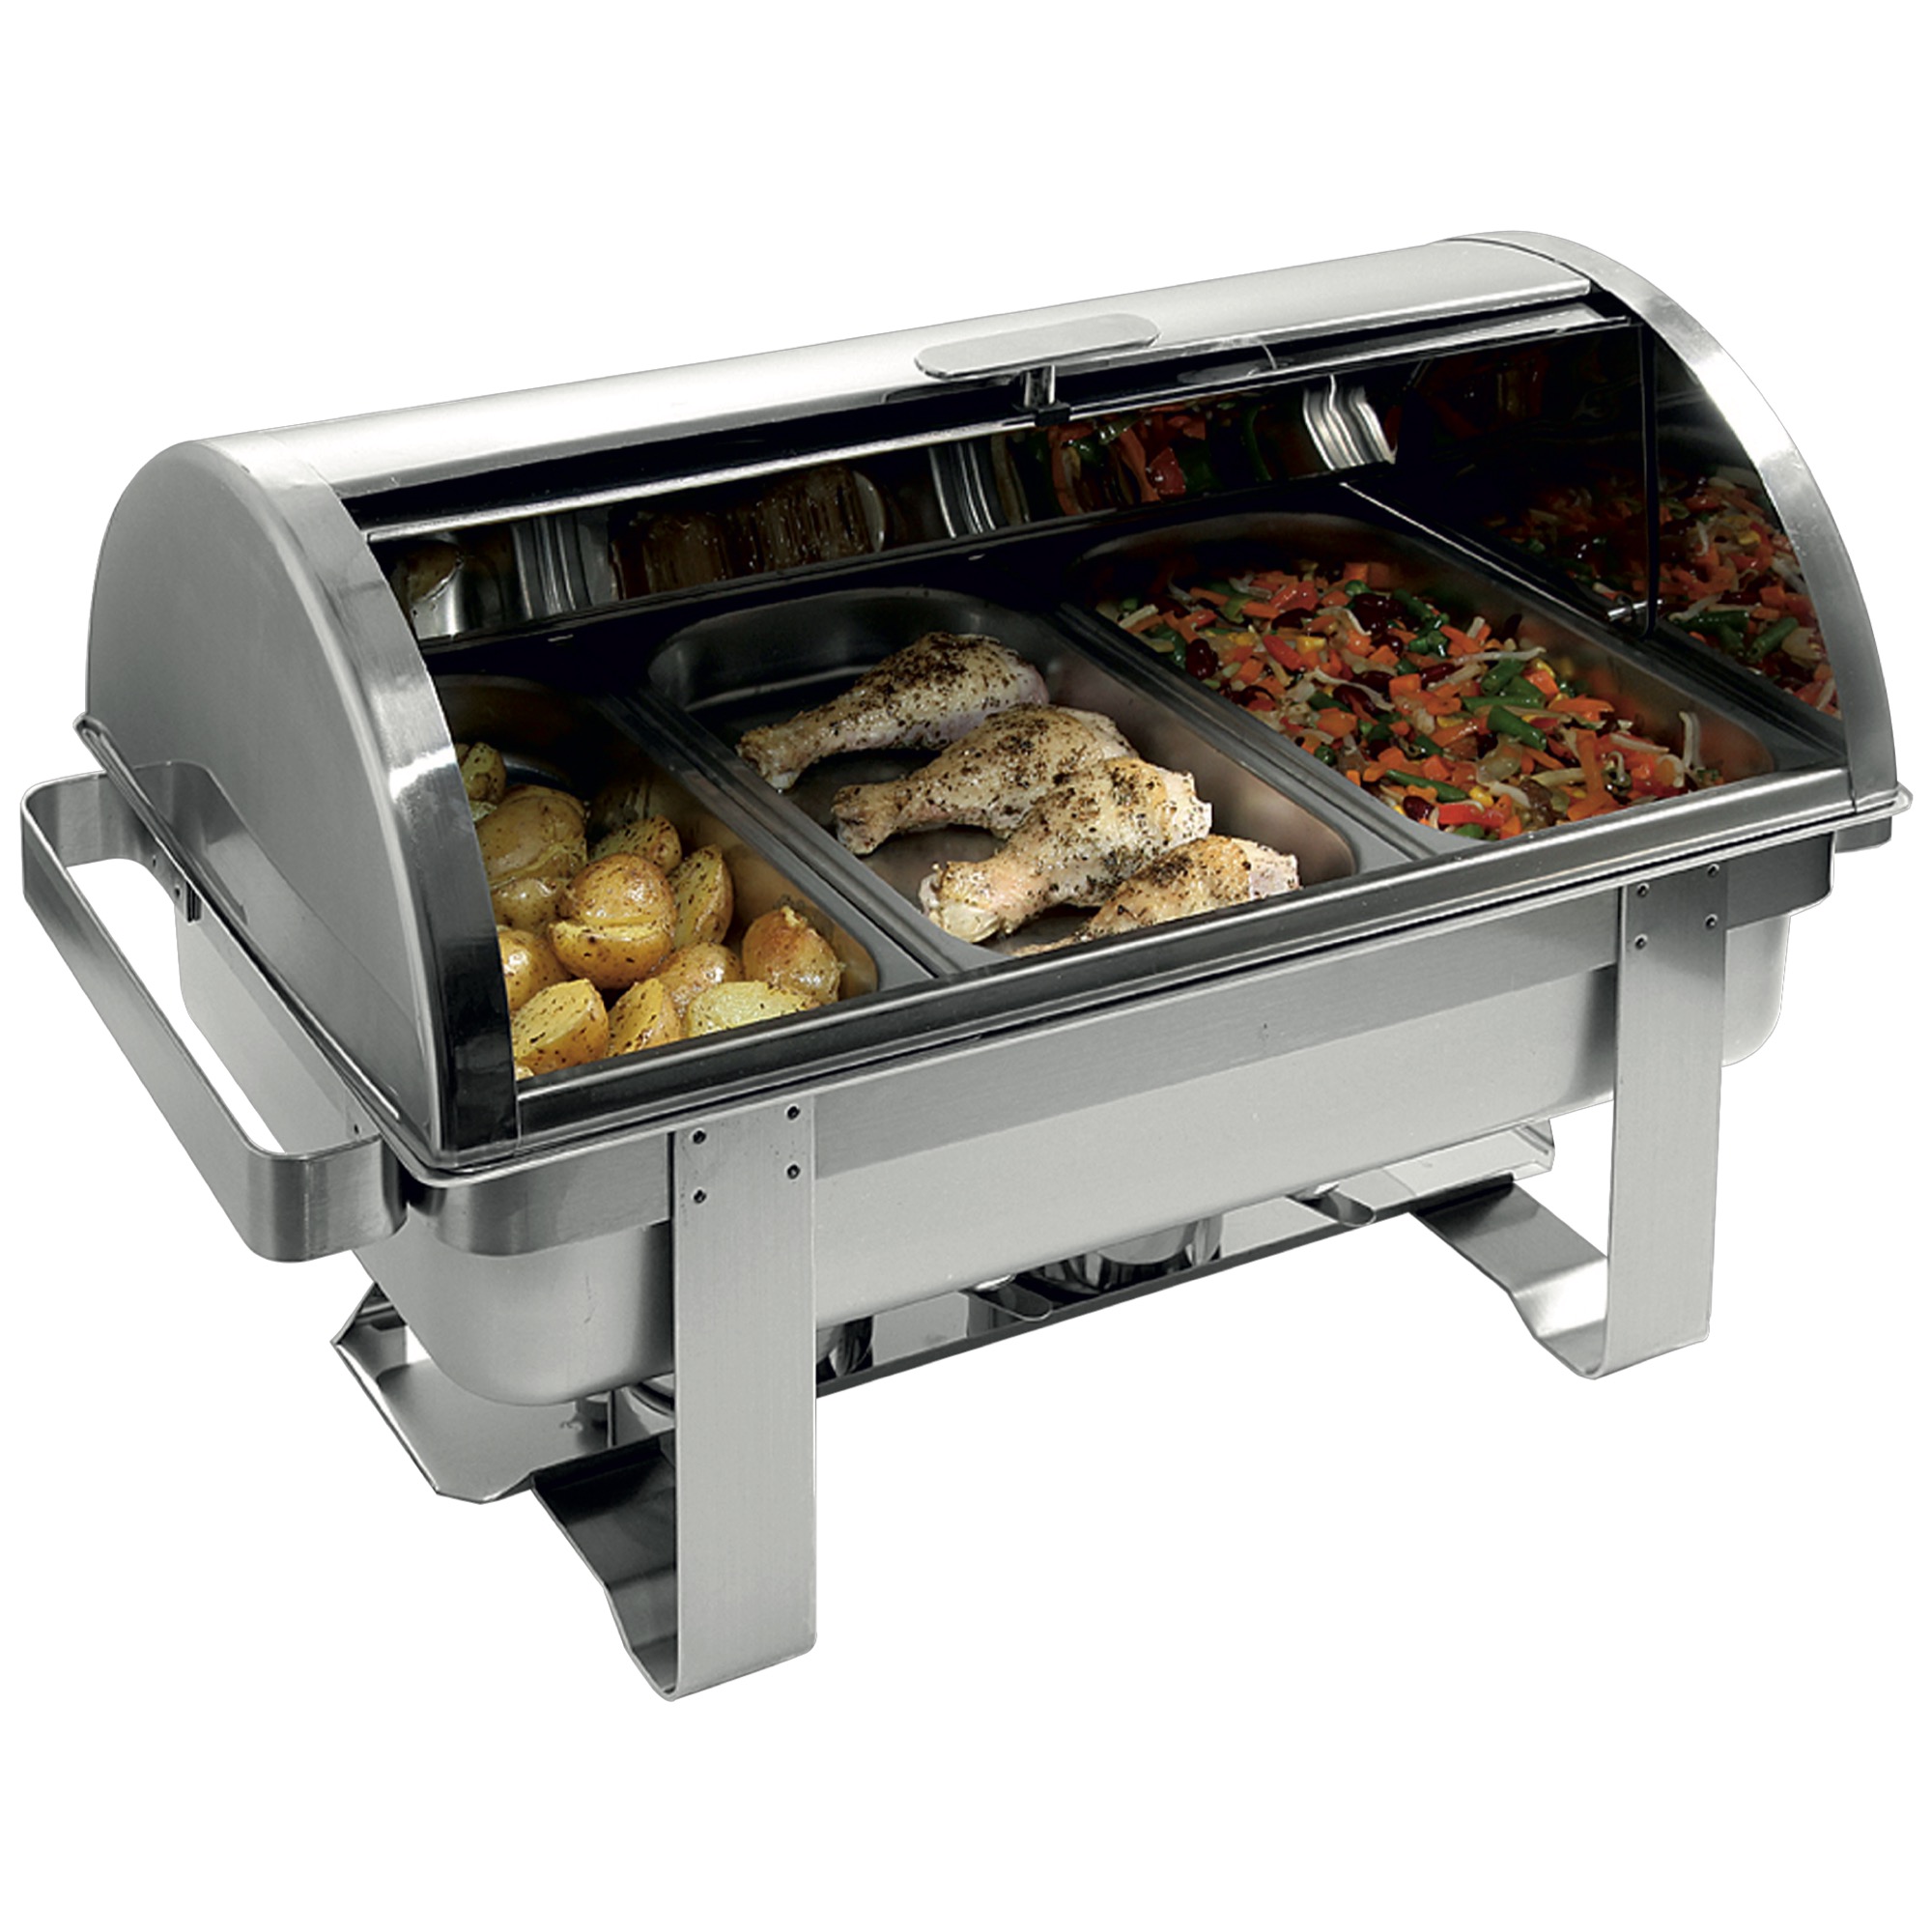 Chafing dish Rolltop GN 1/1 9 lt. Edelst